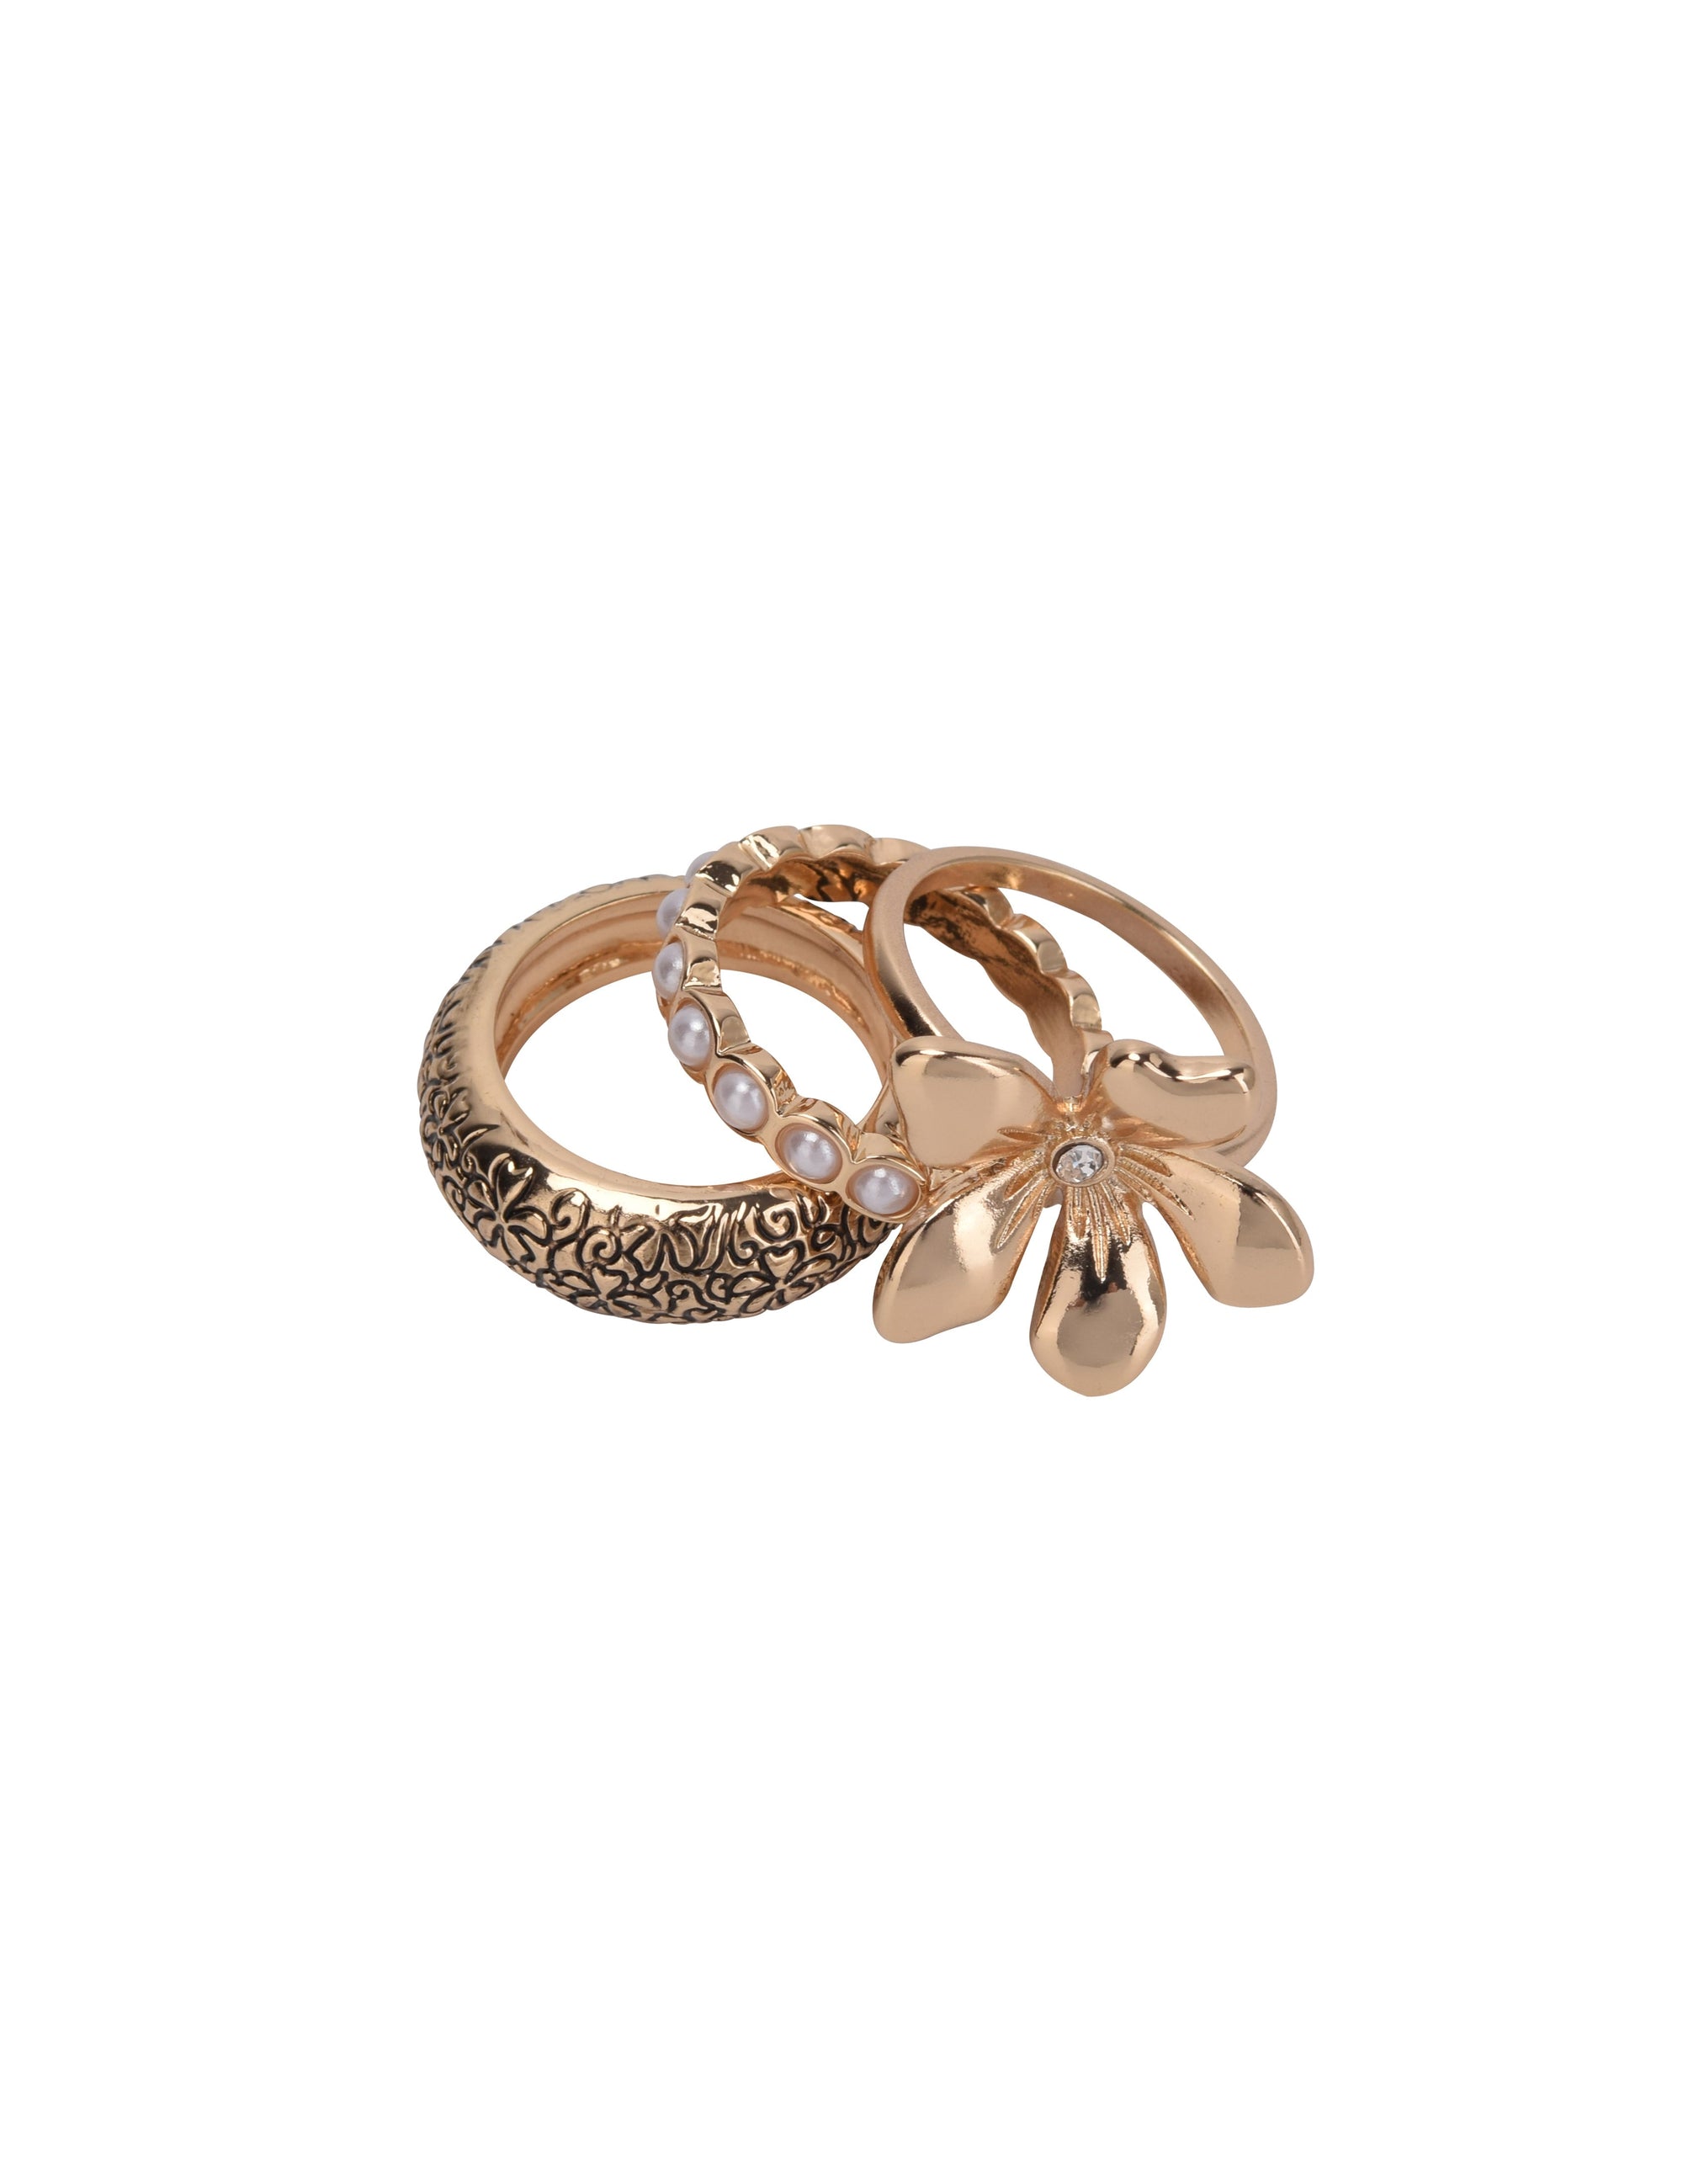 3pc Flower and Stone Ring Set